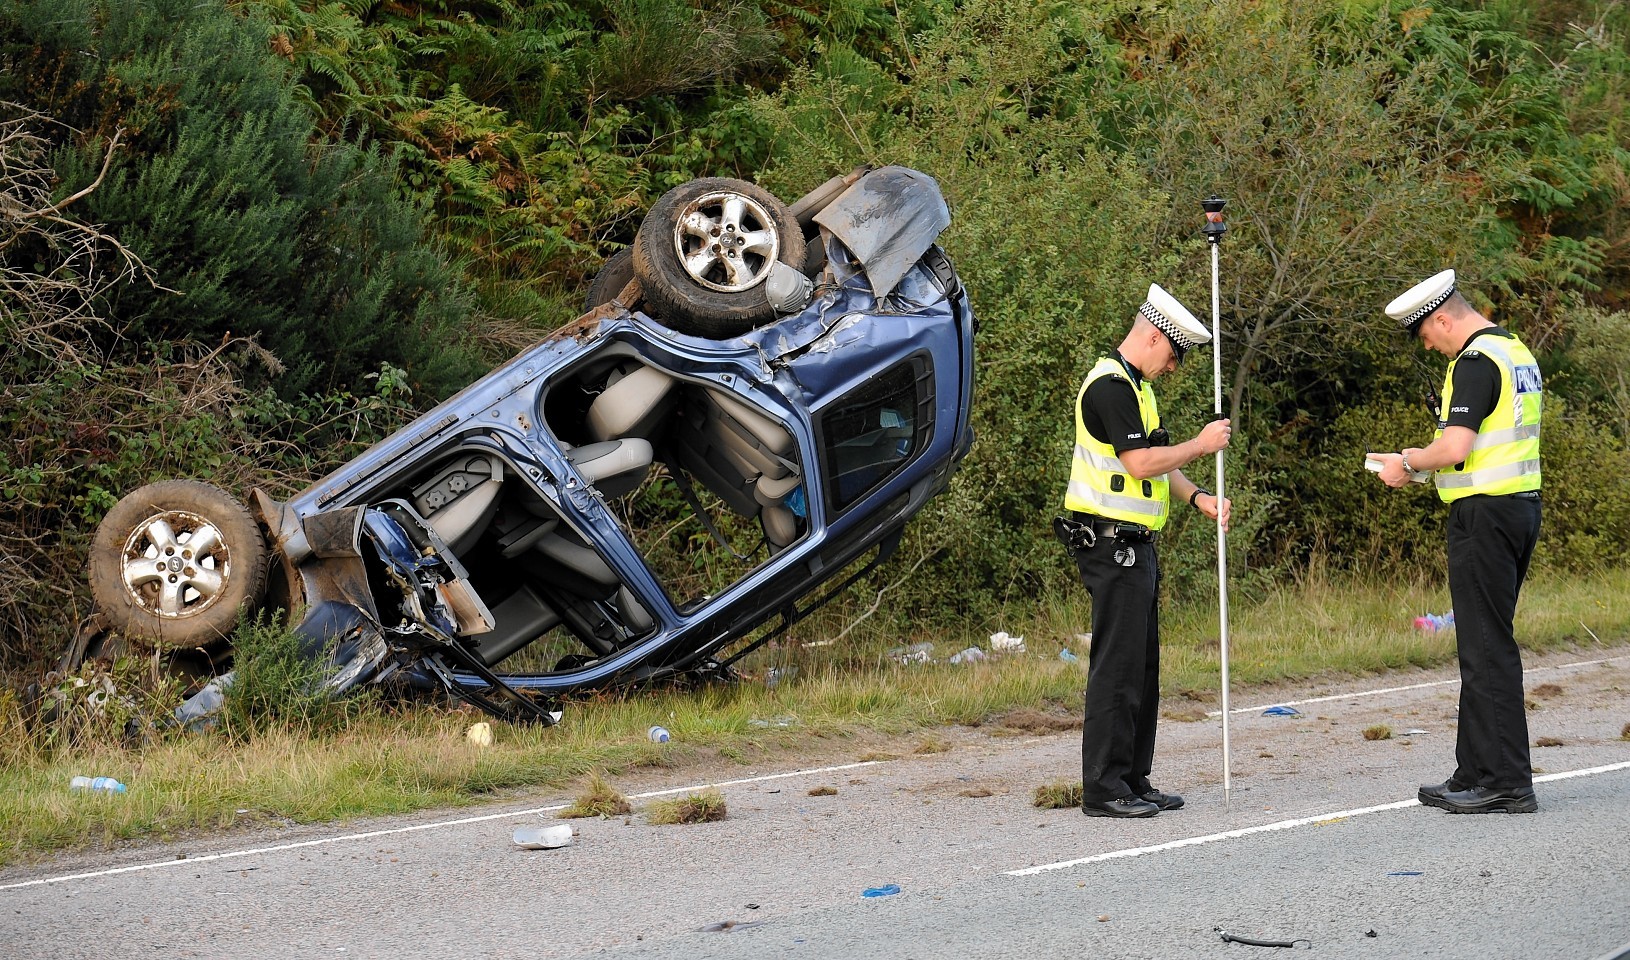 The woman's car overturned during the crash